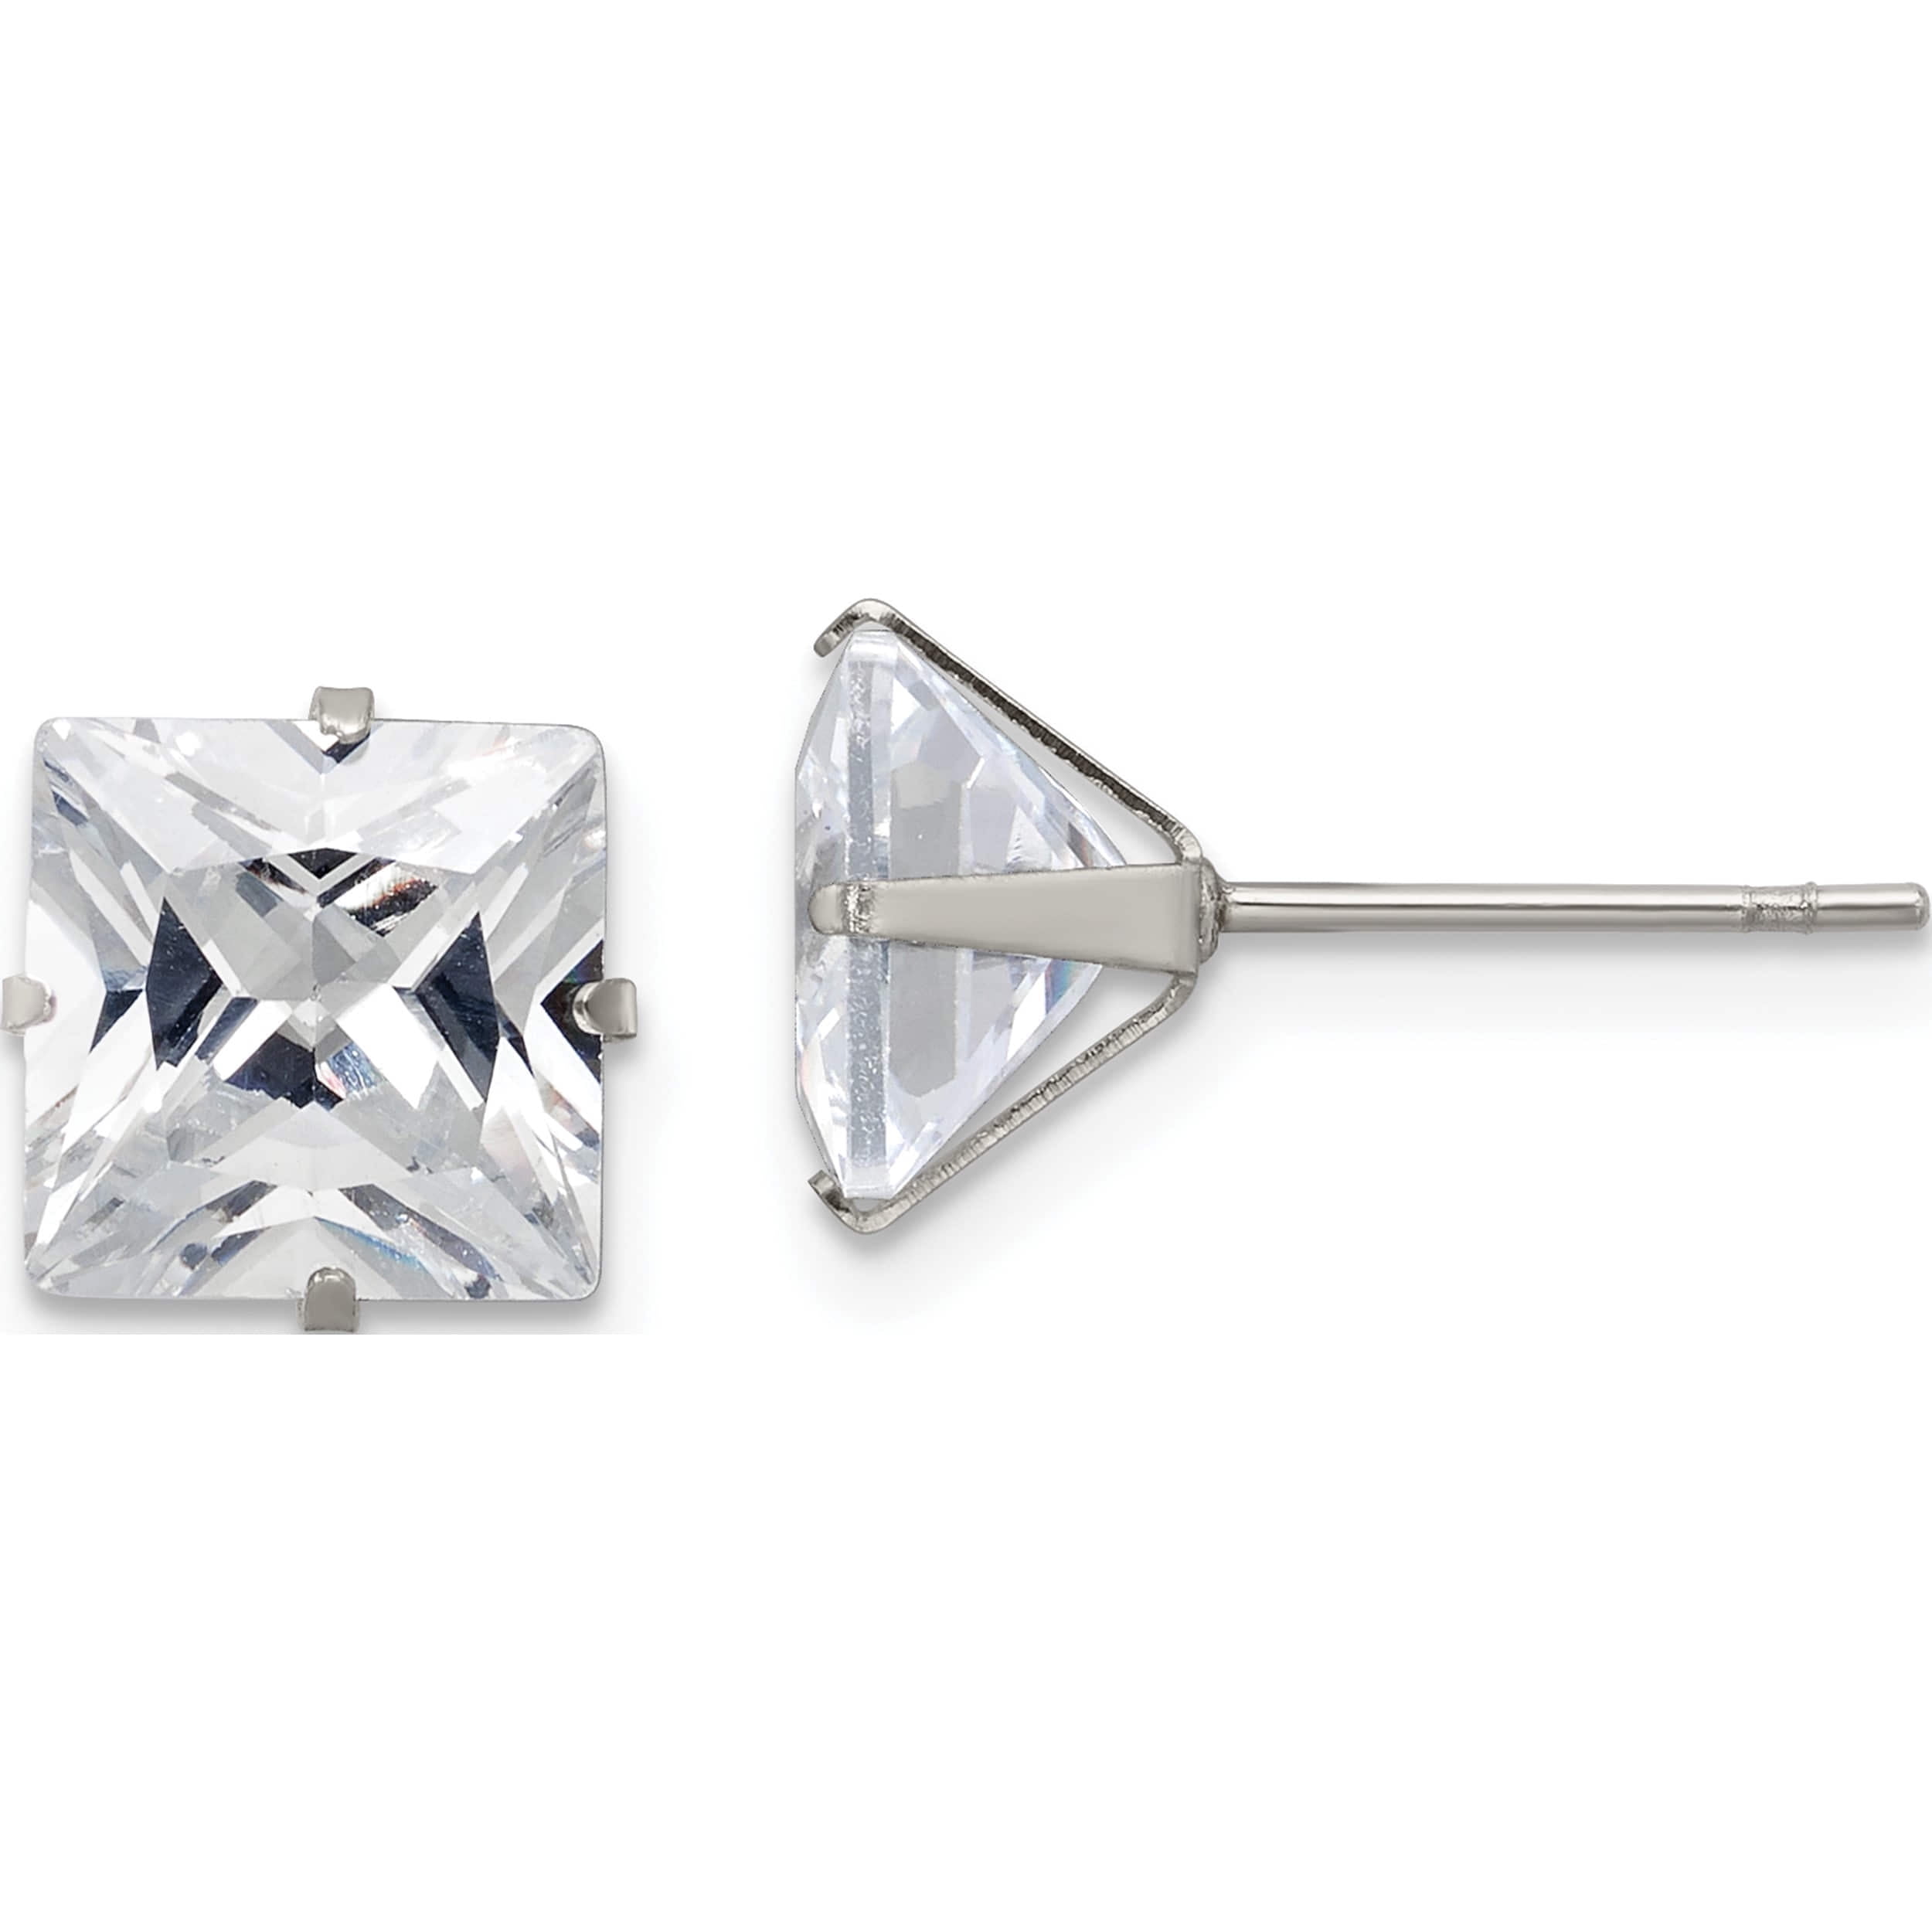 Stainless Steel Polished 8mm Square CZ Stud Post Earrings 8.79 mm 8.81 mm Stud Earrings Jewelry